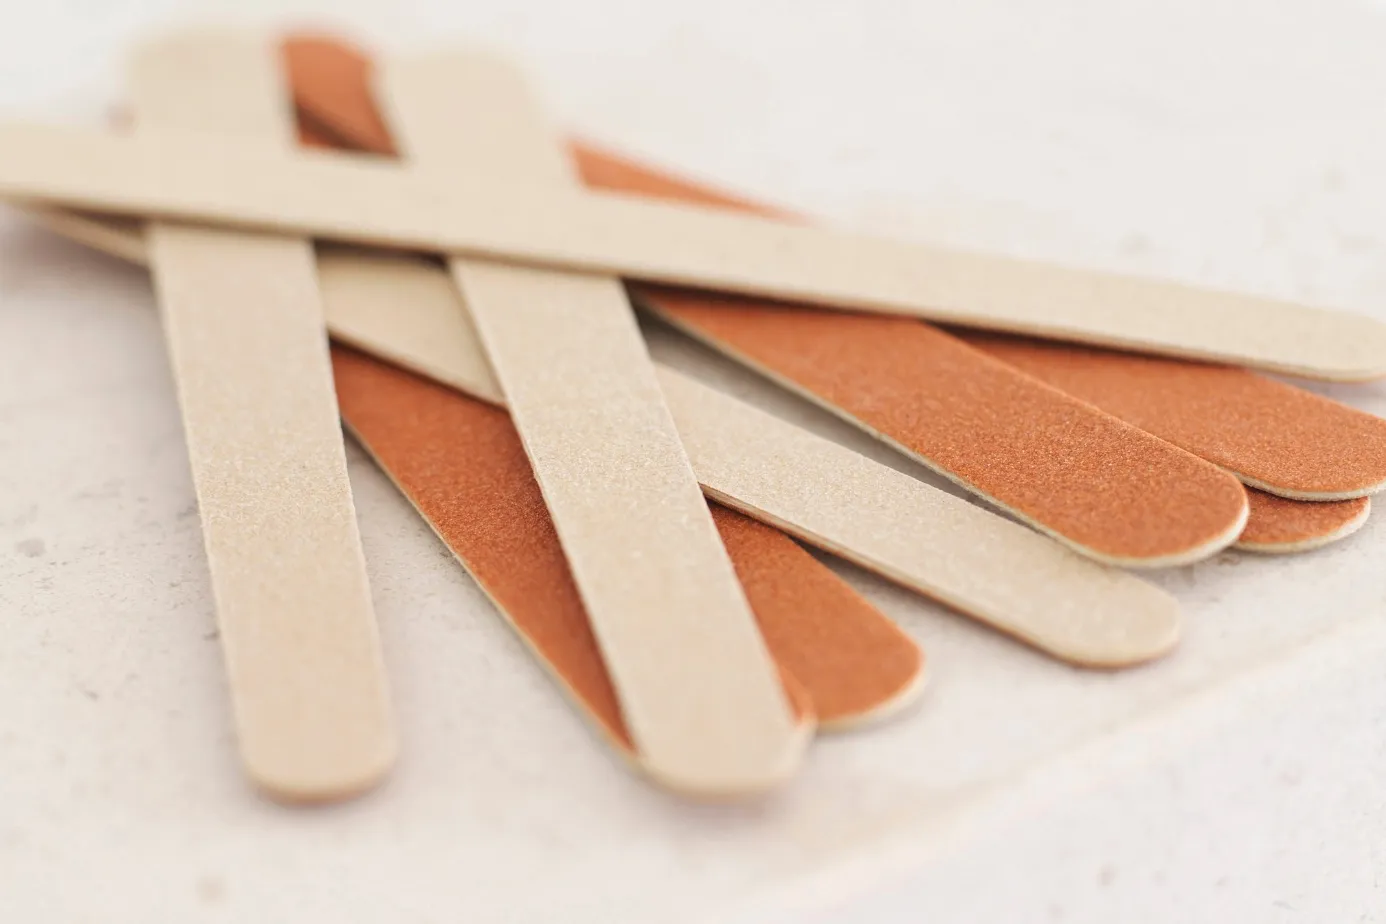 How to Clean and Sanitize Nail Files